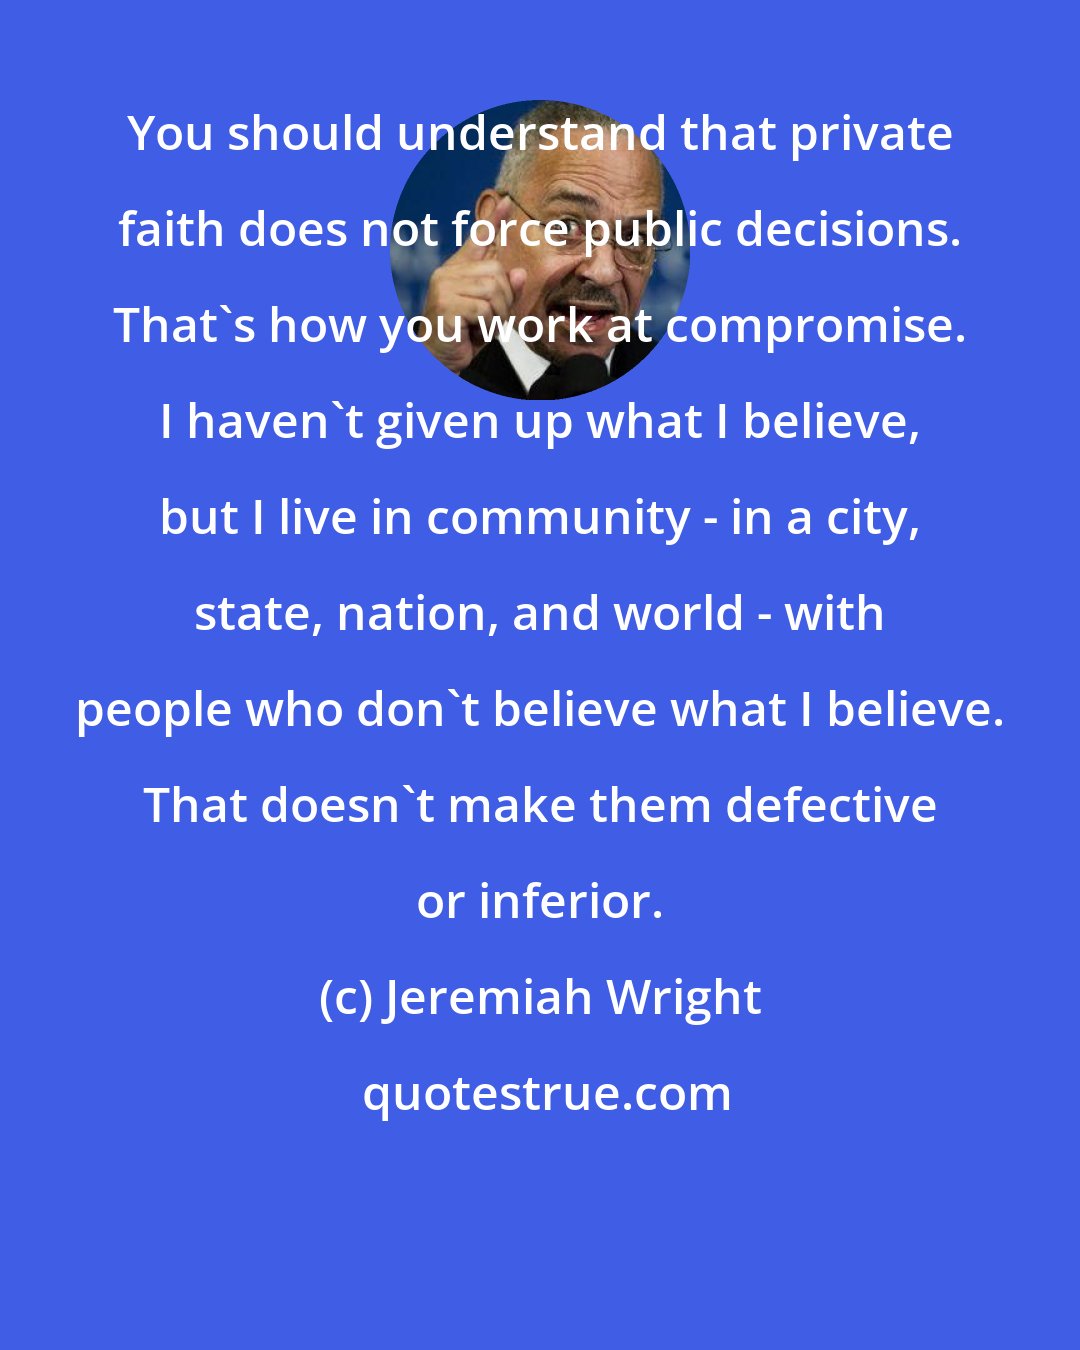 Jeremiah Wright: You should understand that private faith does not force public decisions. That's how you work at compromise. I haven't given up what I believe, but I live in community - in a city, state, nation, and world - with people who don't believe what I believe. That doesn't make them defective or inferior.